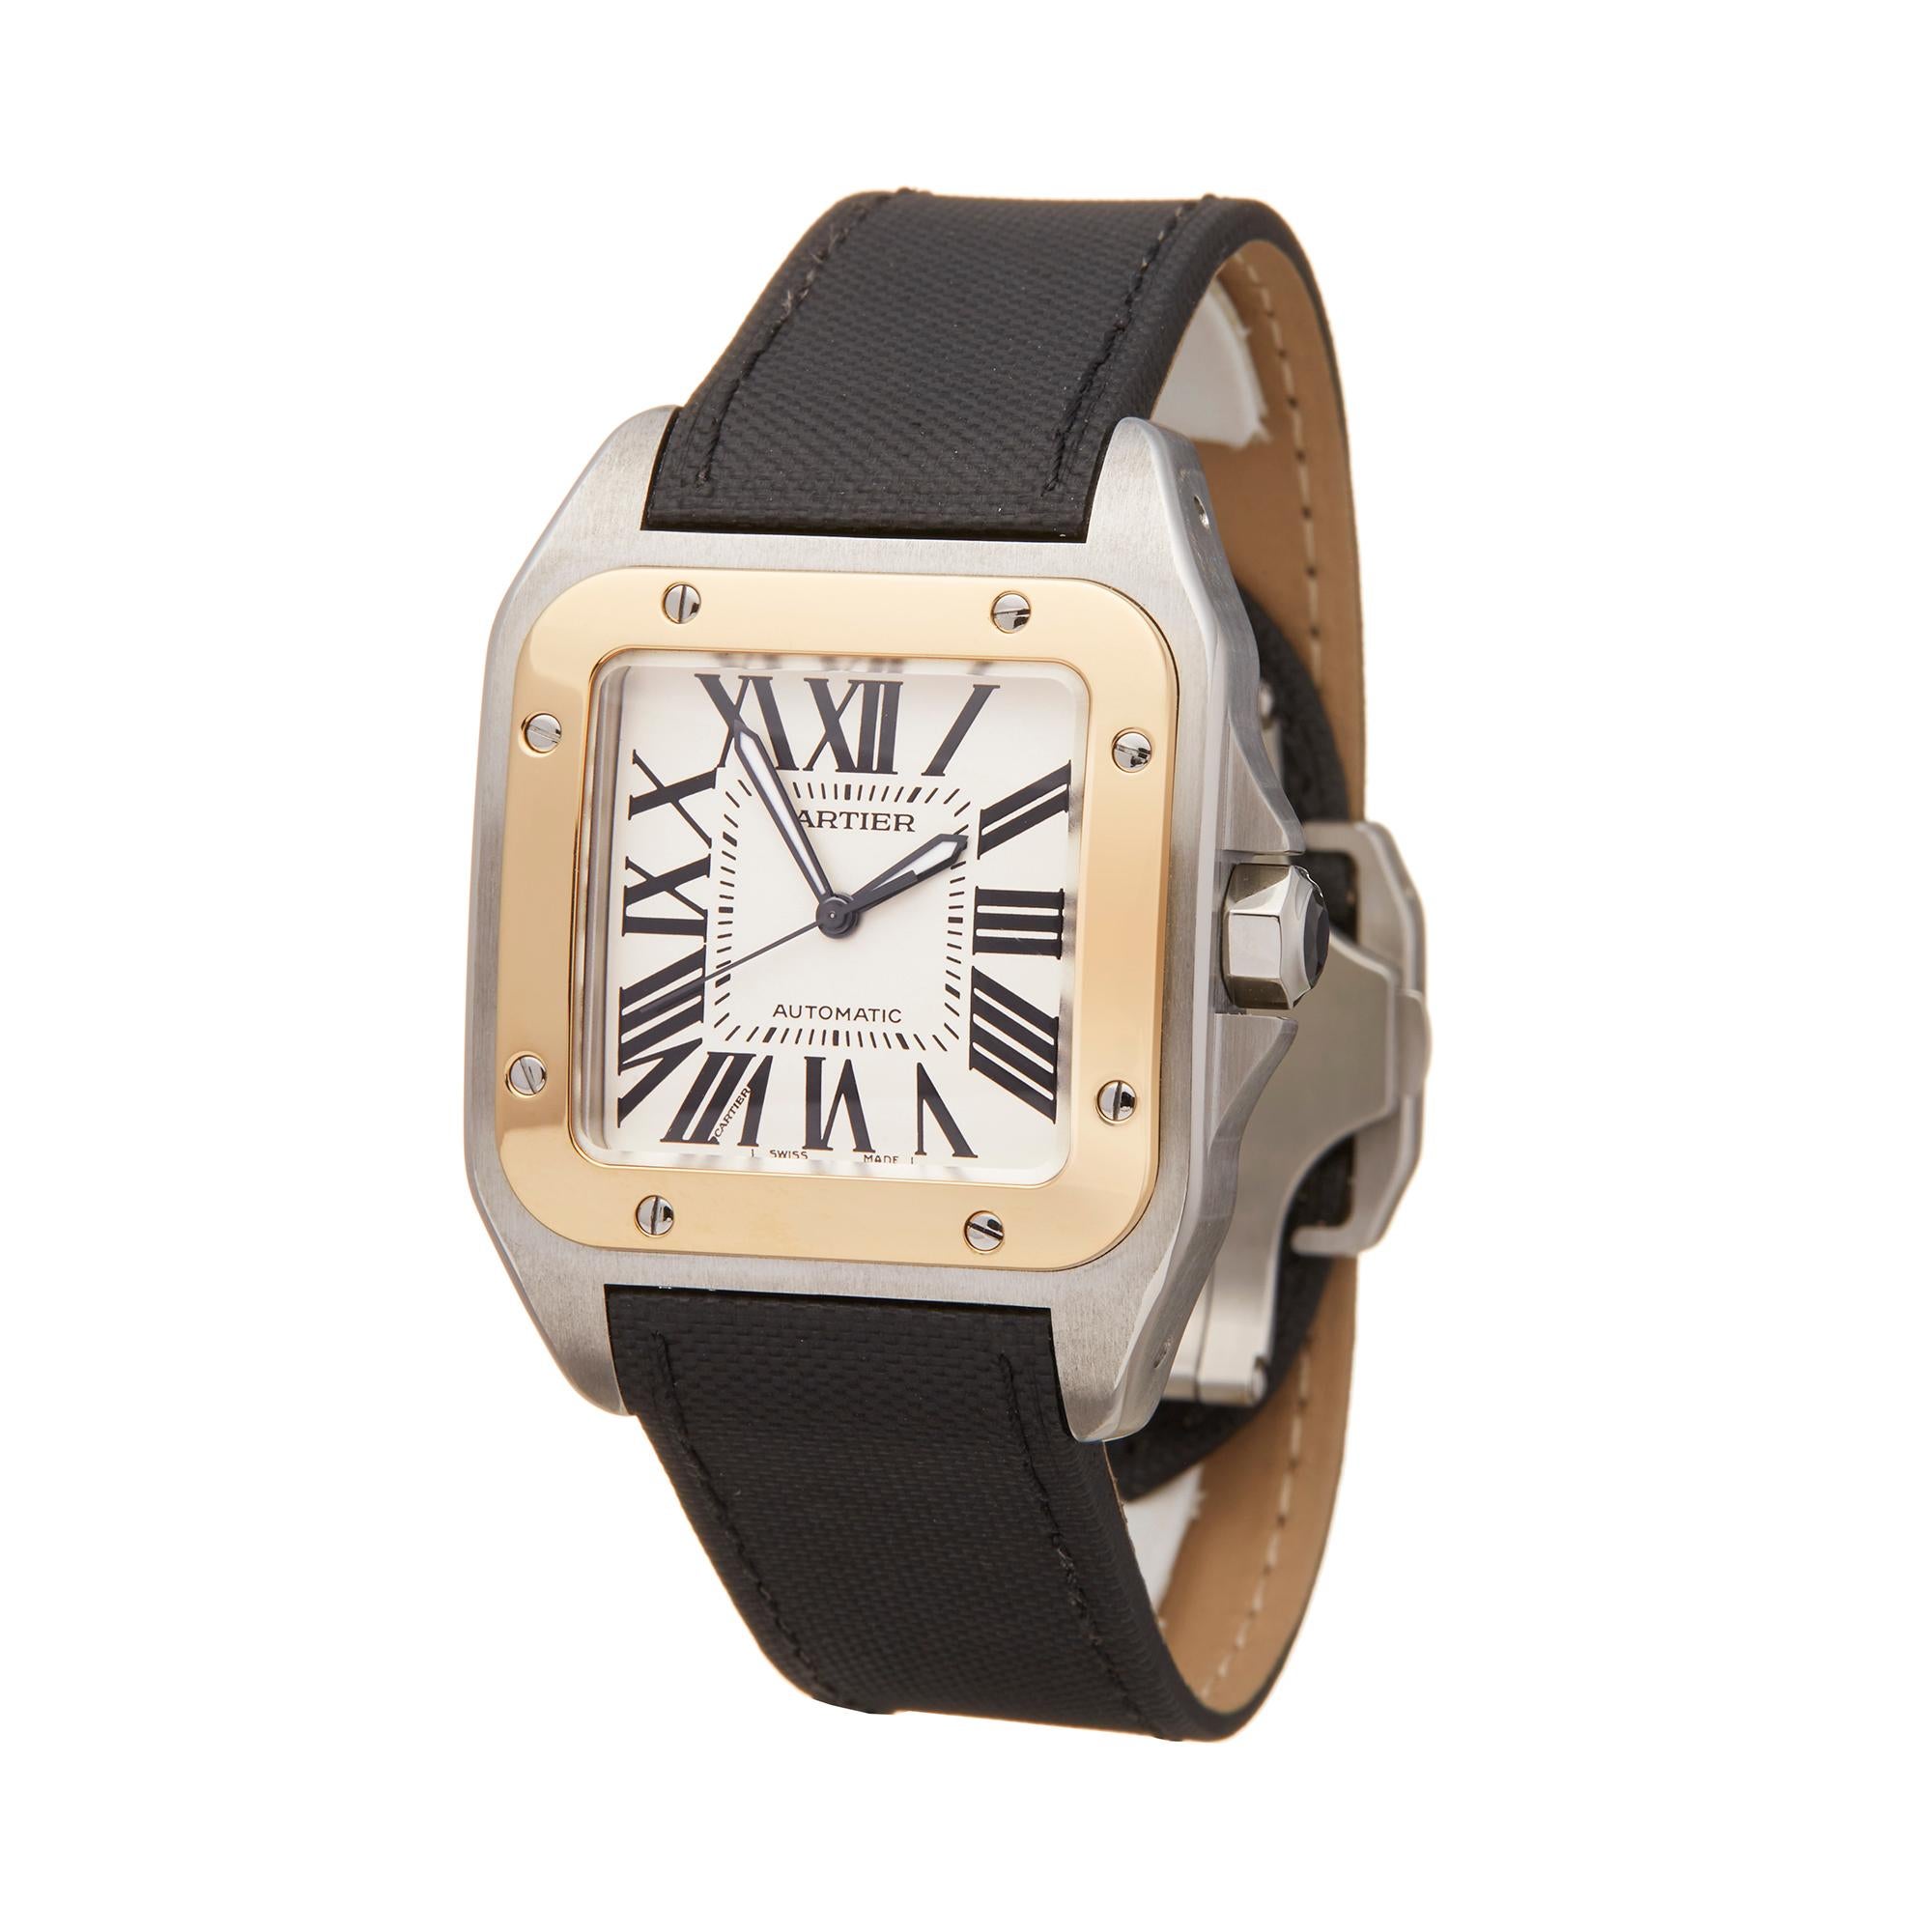 Reference: W5807
Manufacturer: Cartier
Model: Santos 100
Model Reference: W20072X7 or 2656
Age: Circa 2010's
Gender: Men's
Box and Papers: Box Only
Dial: White Roman
Glass: Sapphire Crystal
Movement: Automatic
Water Resistance: To Manufacturers